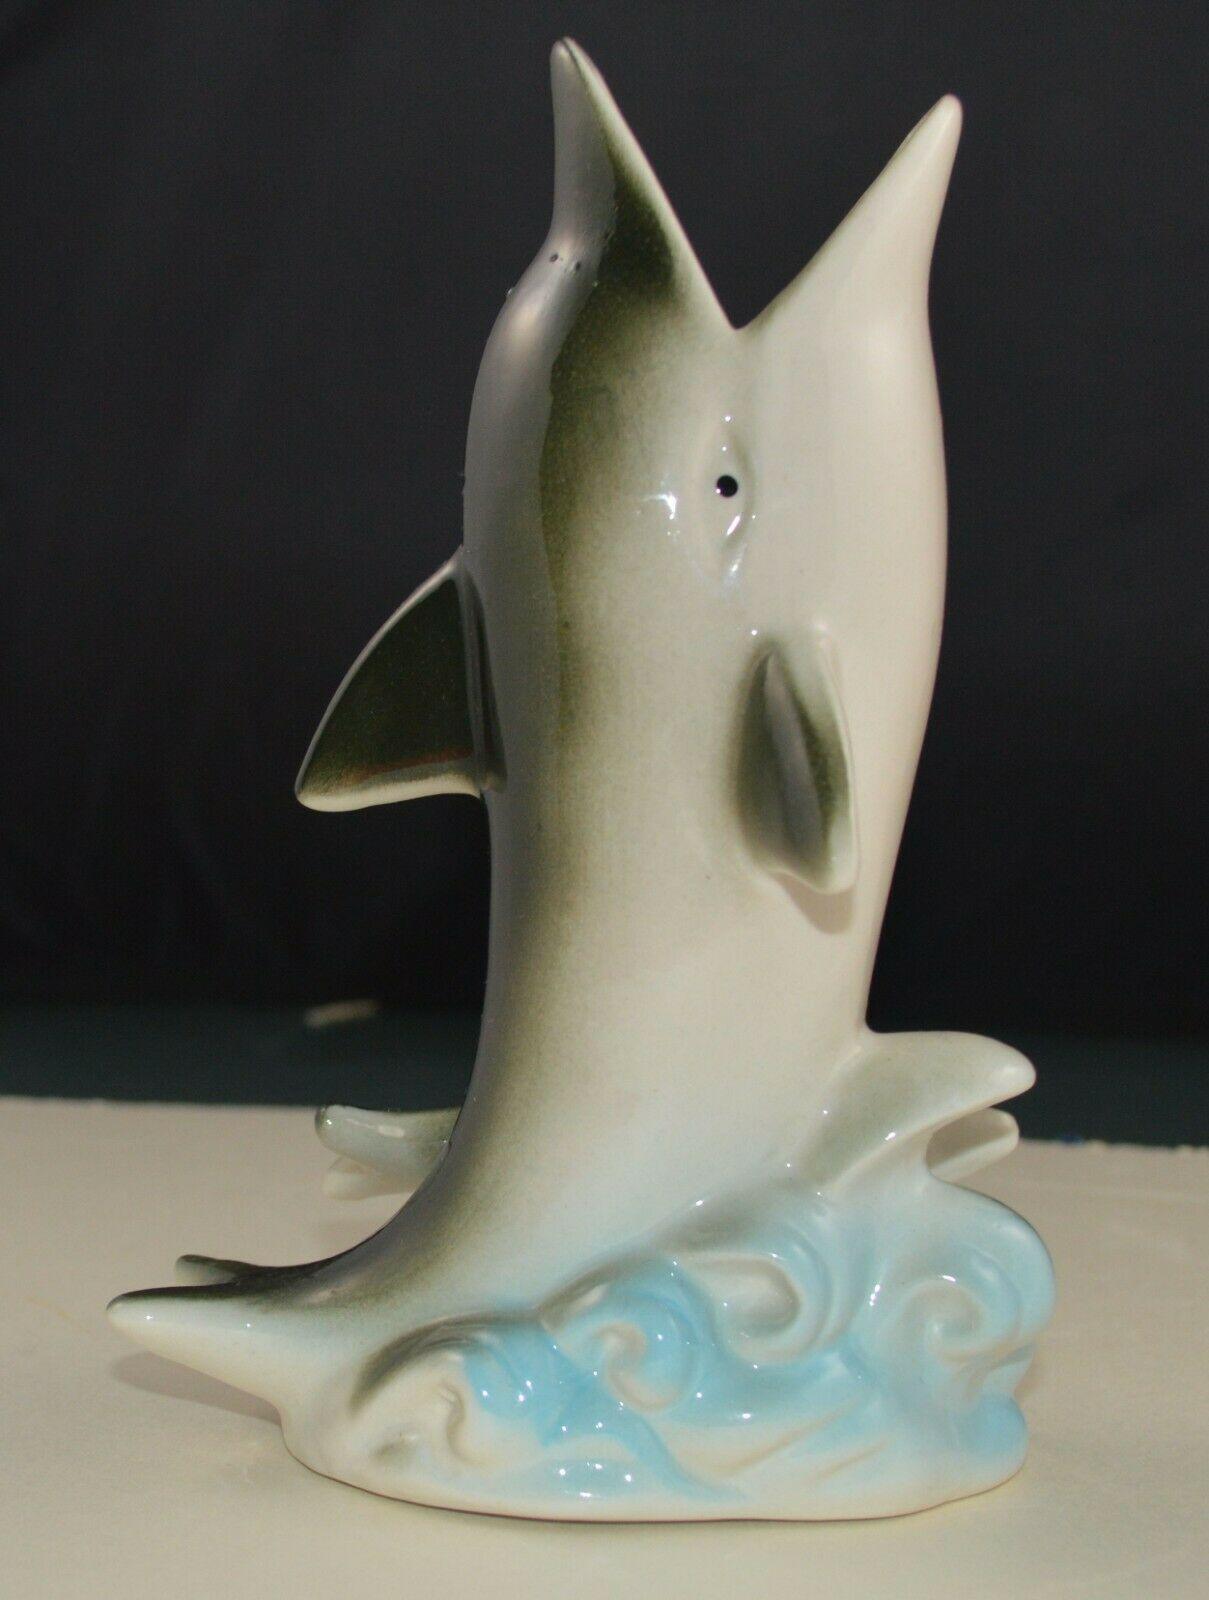 DOLPHIN ORNAMENT (PREVIOUSLY OWNED) GOOD CONDITION - TMD167207